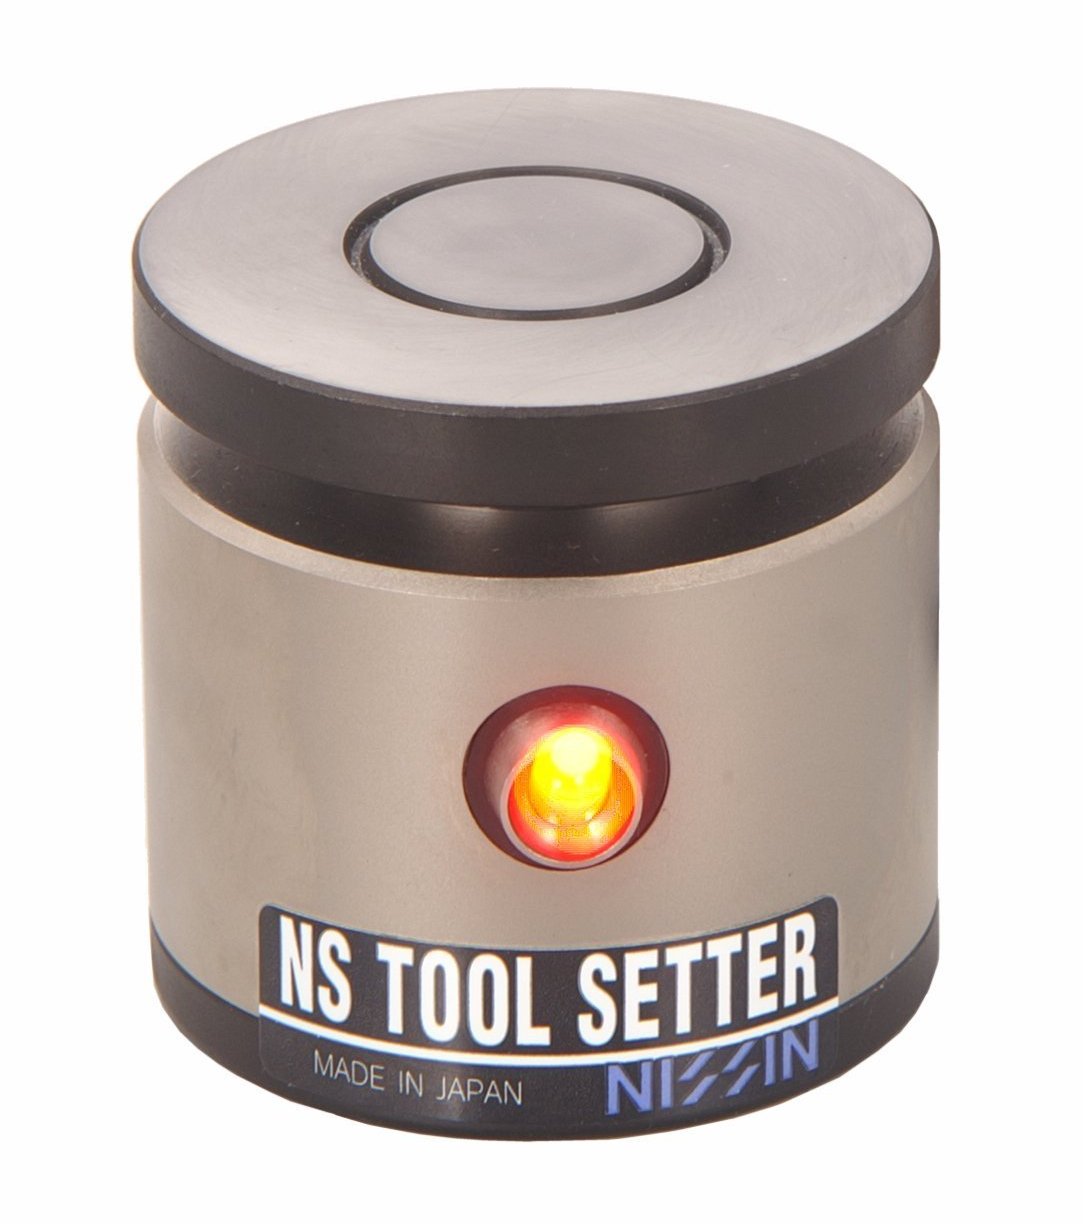 NS Tool Setter / Magnet Cable